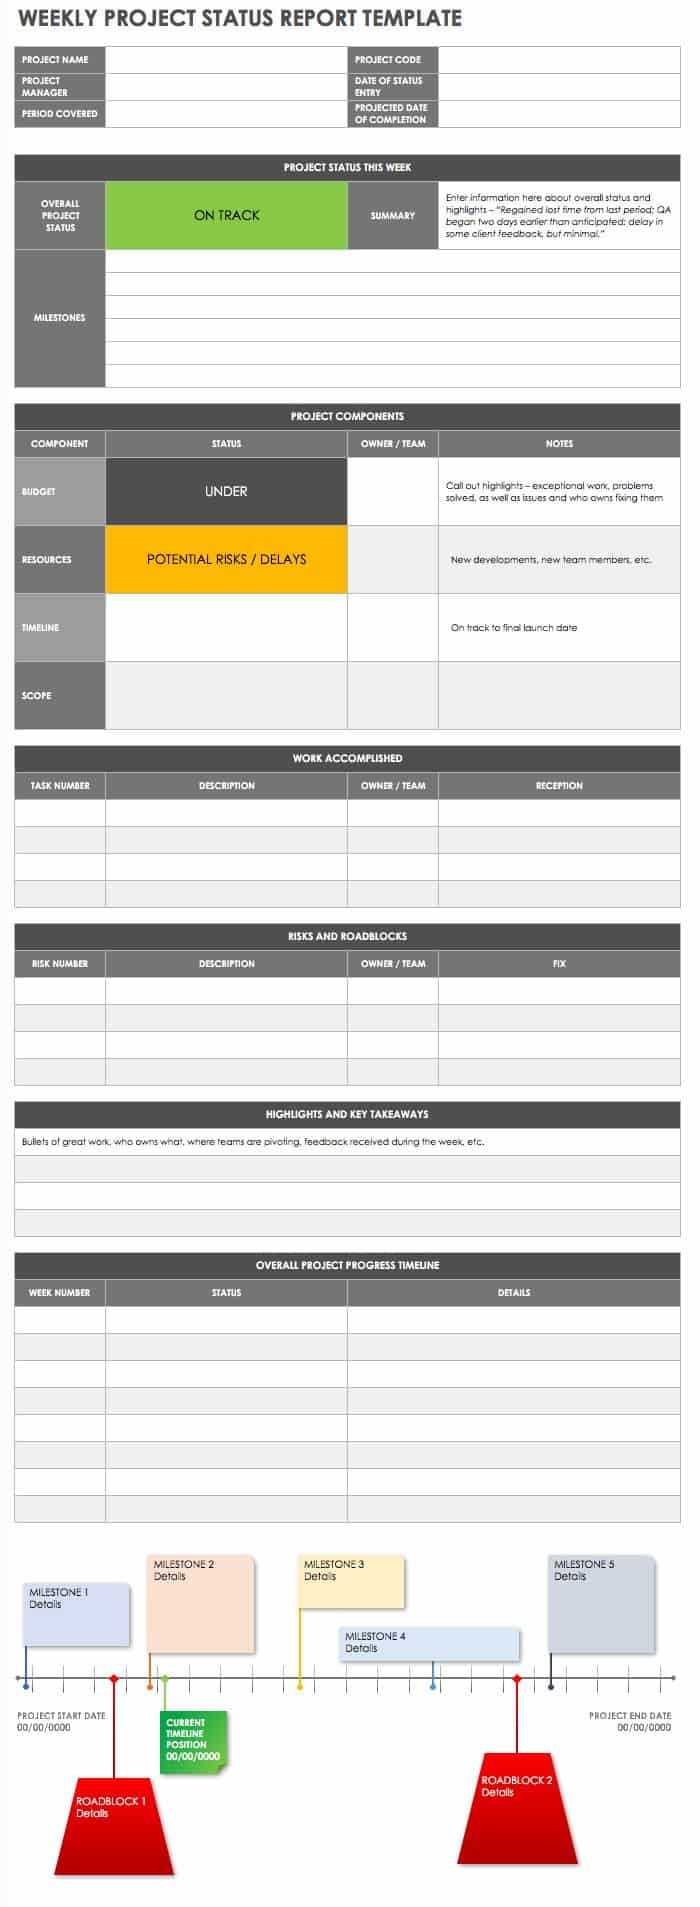 Free Project Report Templates | Smartsheet Intended For Executive Summary Project Status Report Template